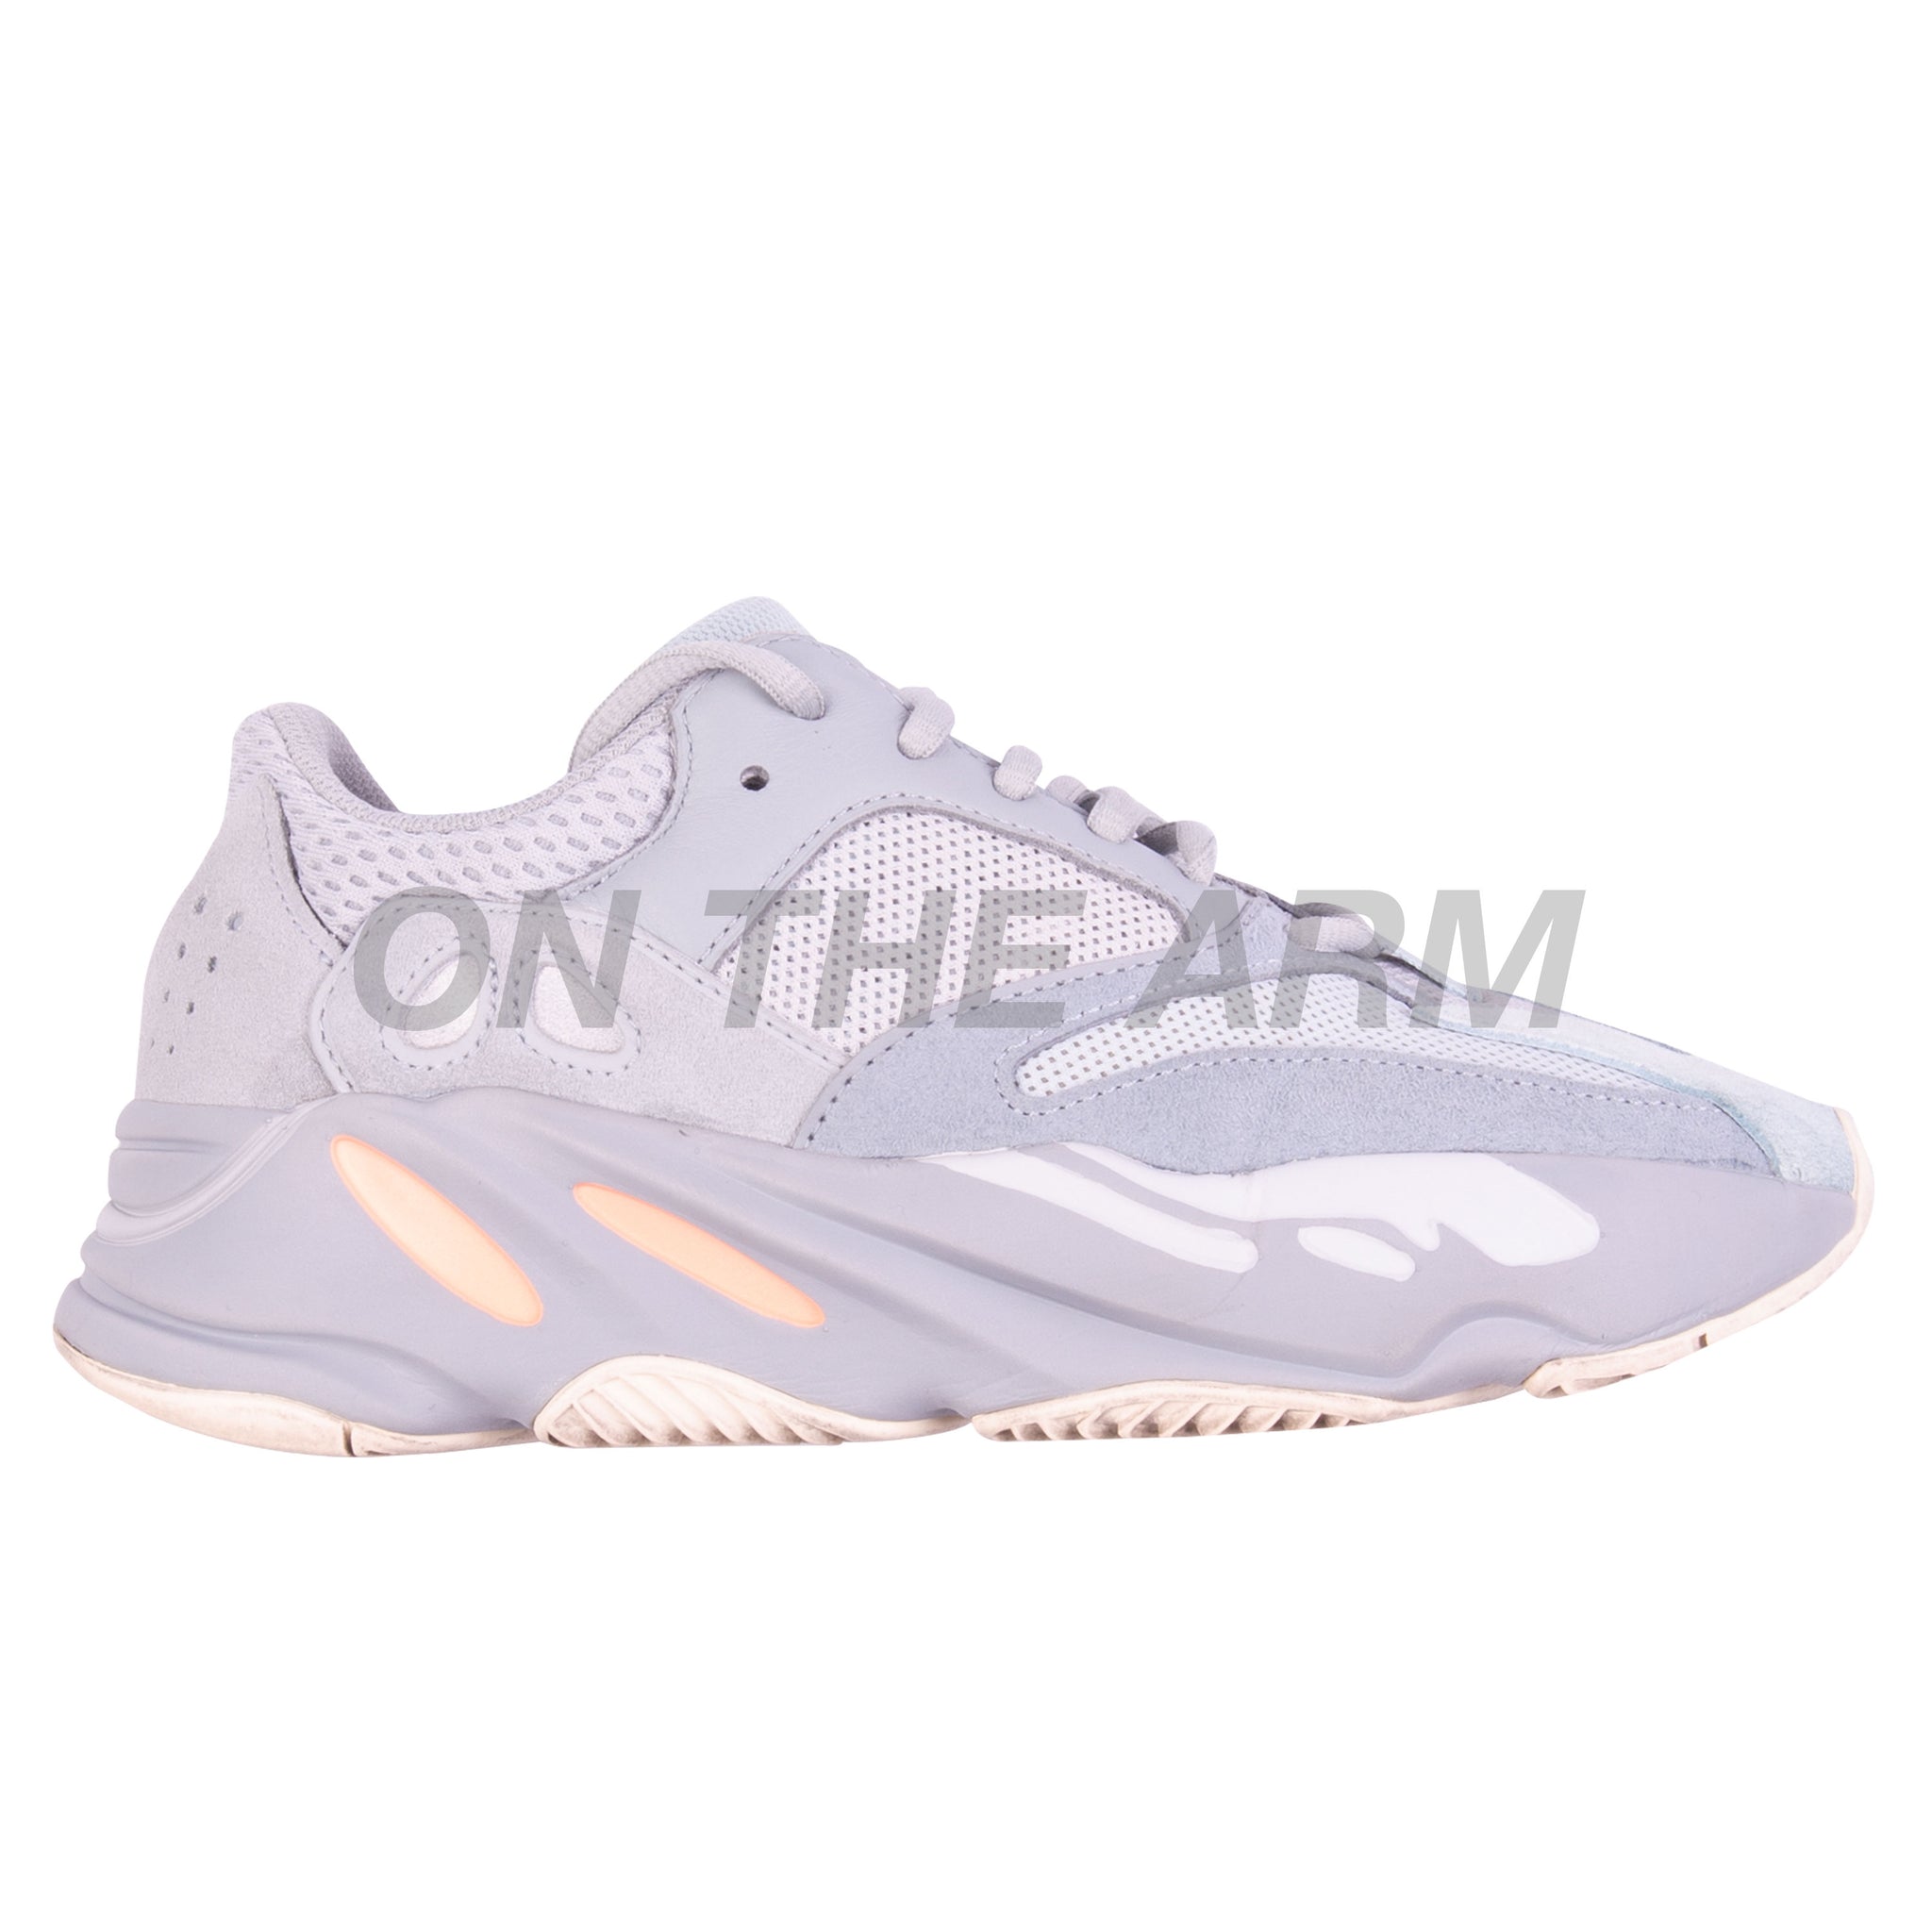 yeezy boost 700 used